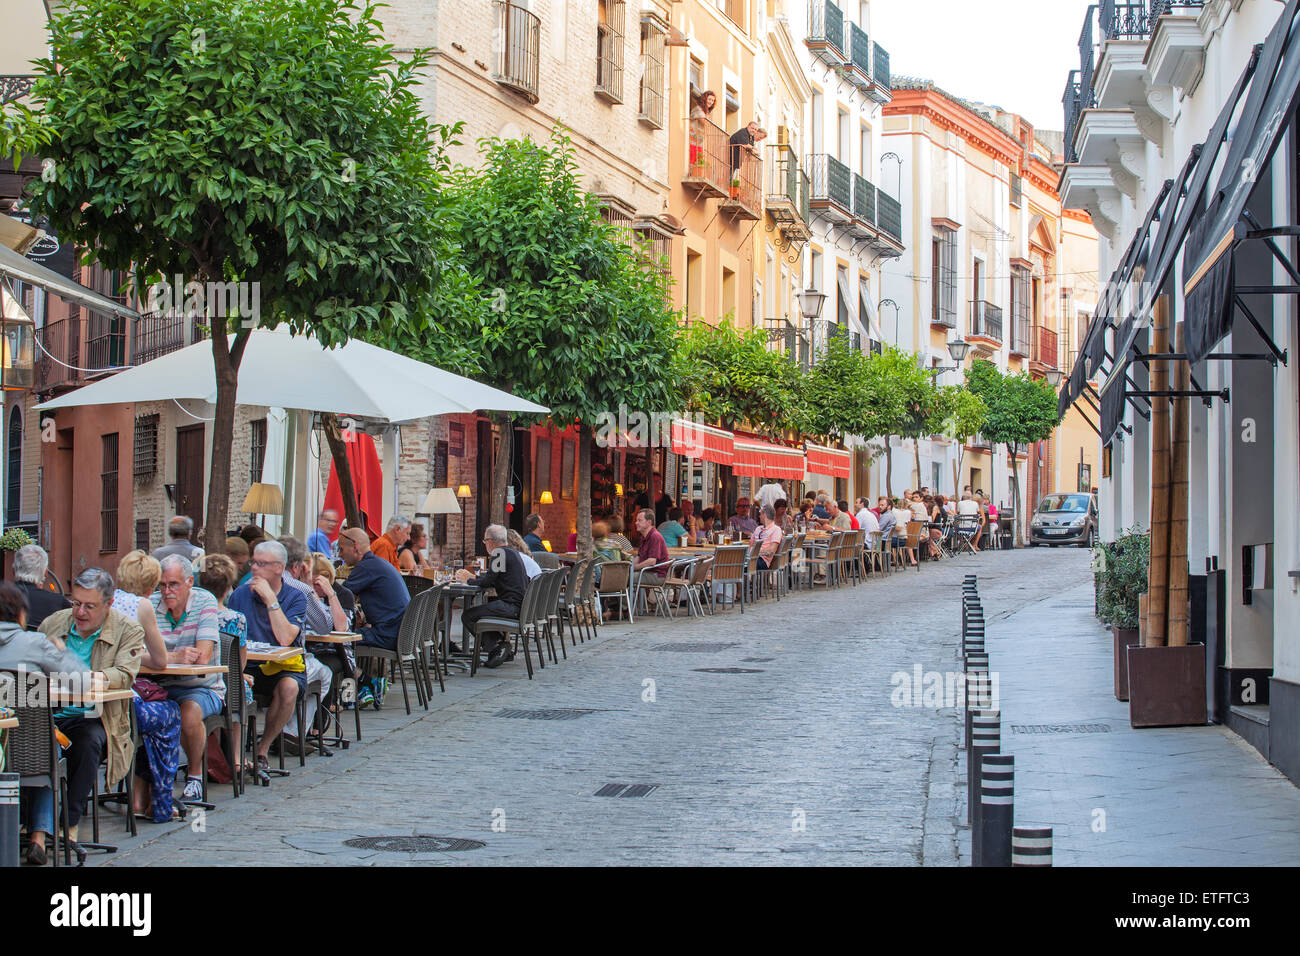 Seville - Calle Alvarez Quintero, street with people eating at outside cafes and resturants Stock Photo